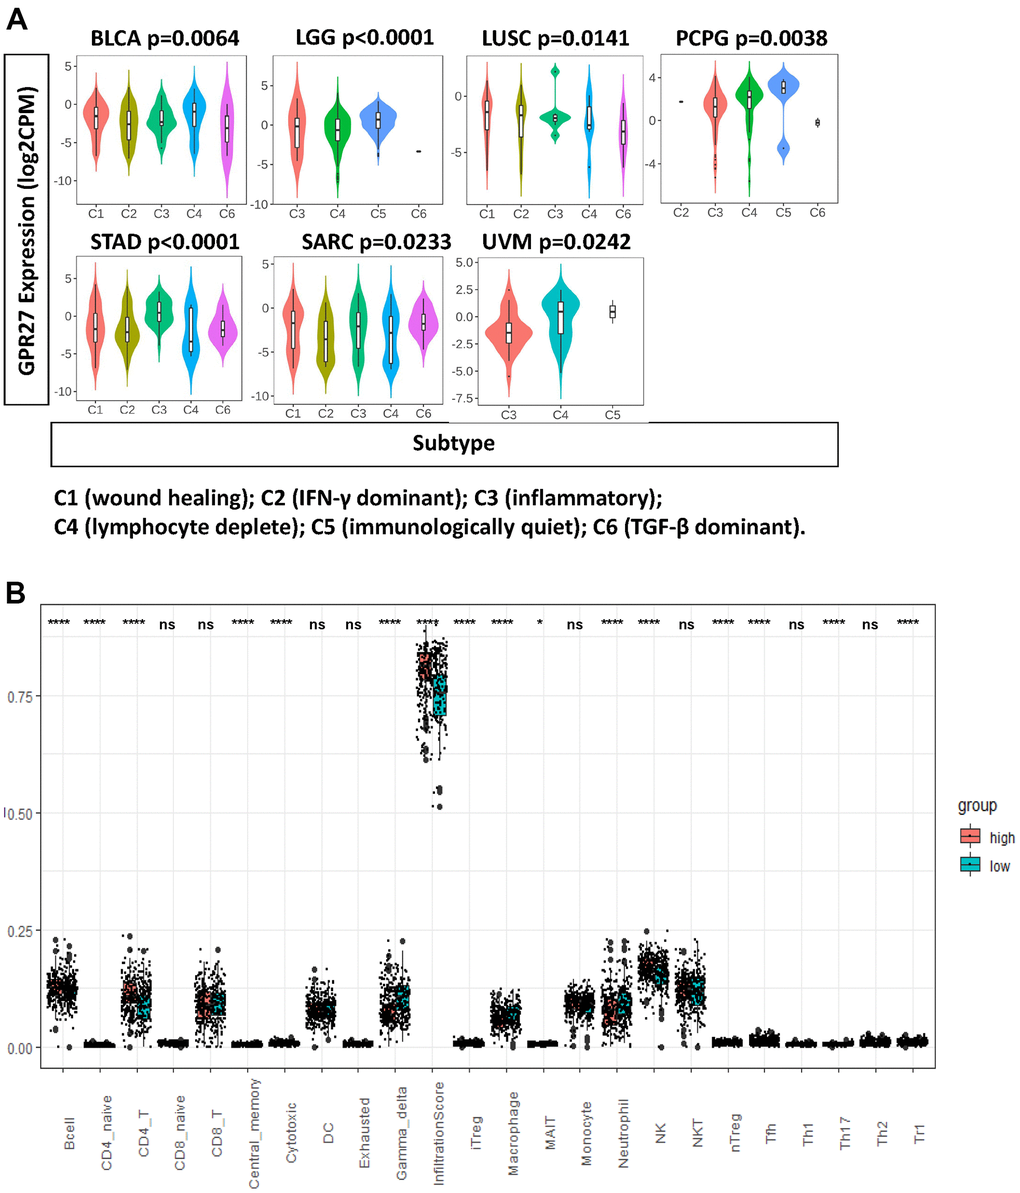 GPR27 is associated with immune infiltration in several human cancers. (A) GPR27 mRNA expression in different immune subtypes in BLCA, LGG, LUSC, PCPG, STAD, SARC, UVM from TISIDB (http://cis.hku.hk/TISIDB/index.php), (B) The fraction of tumor infiltrating immune cells in GPR27 high and low subgroups.